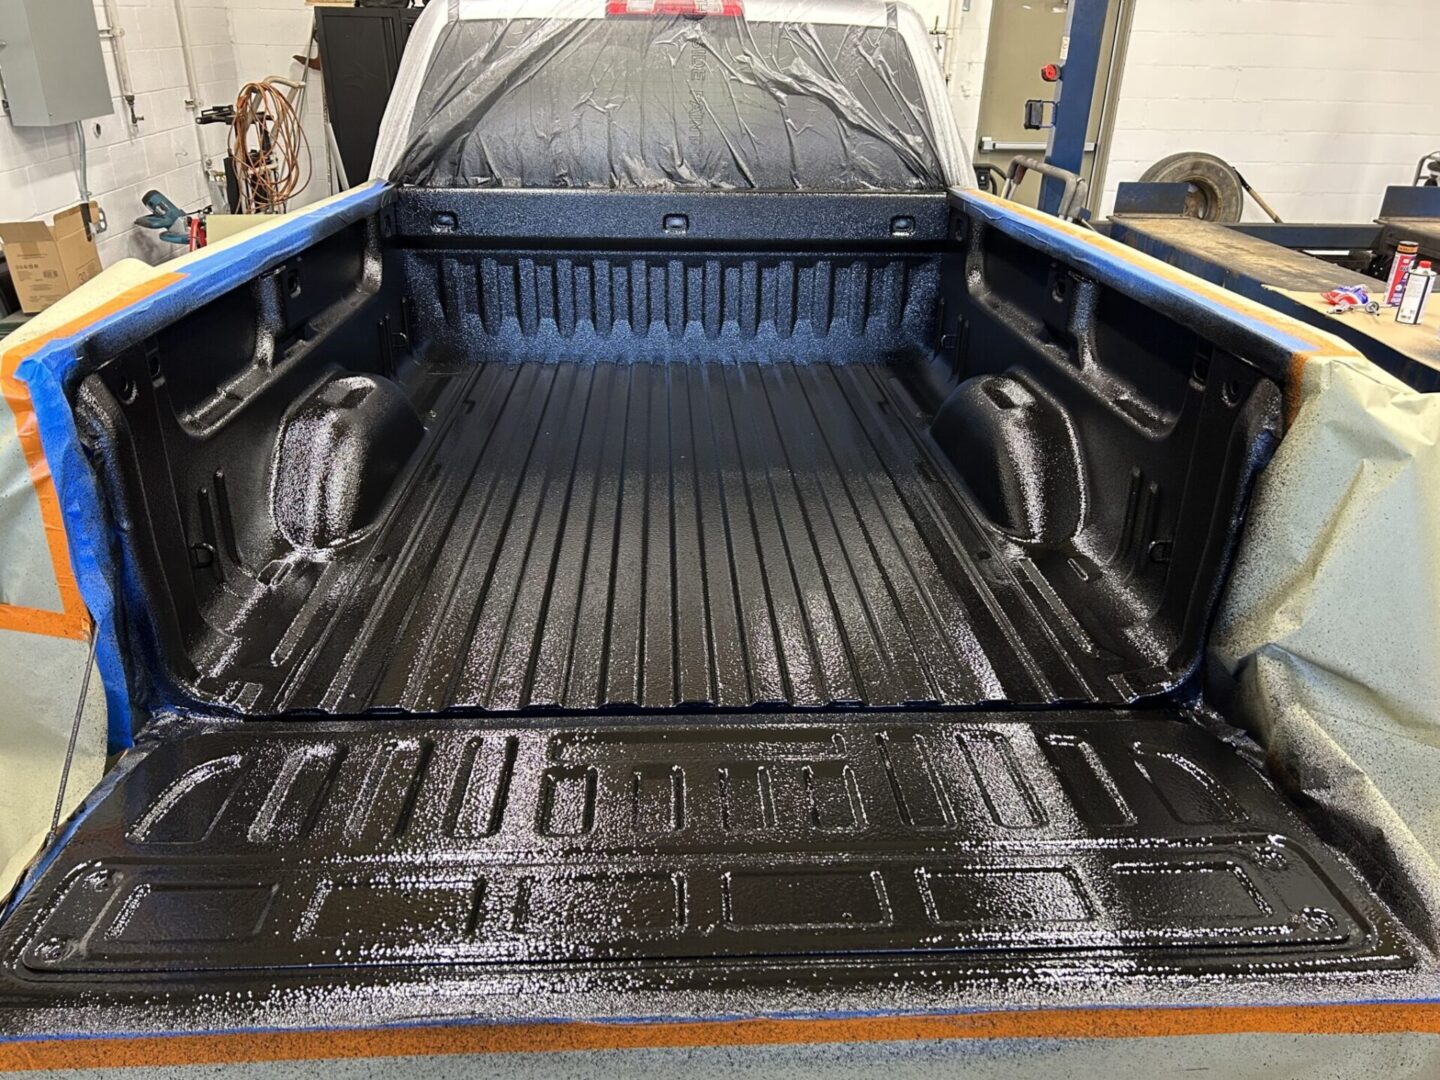 A truck bed with the liner being painted black.